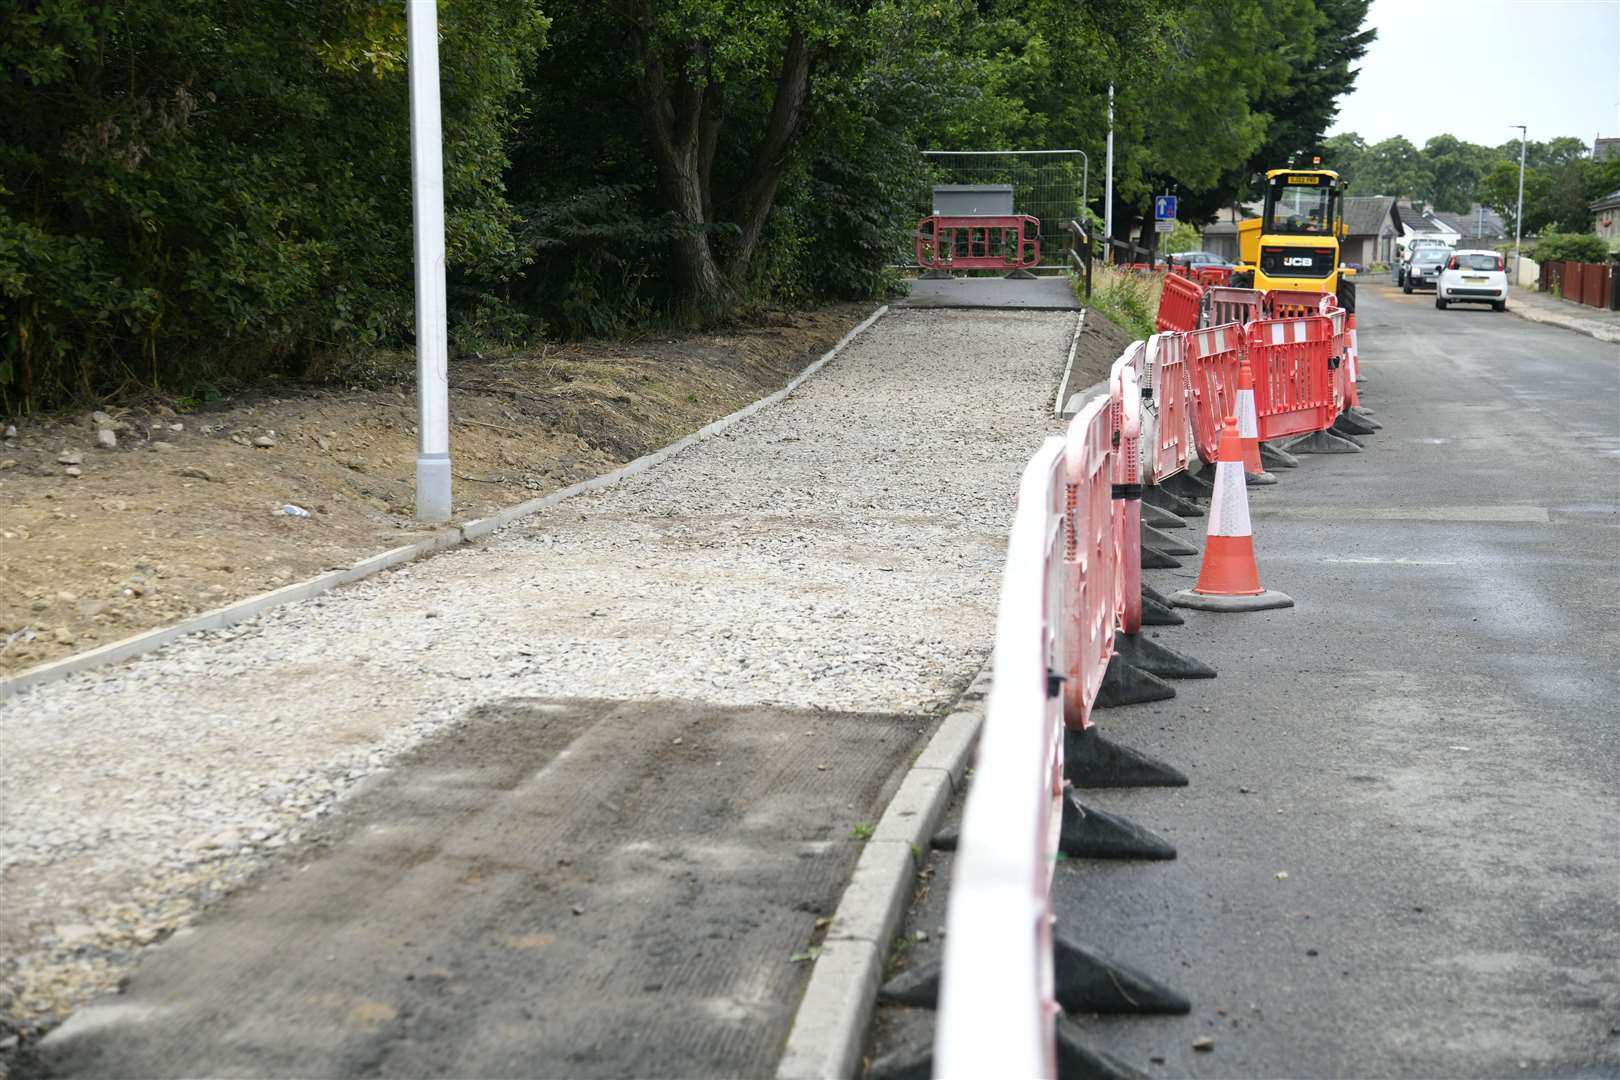 Footpaths are being widened at Burdshaugh. Picture: Beth Taylor